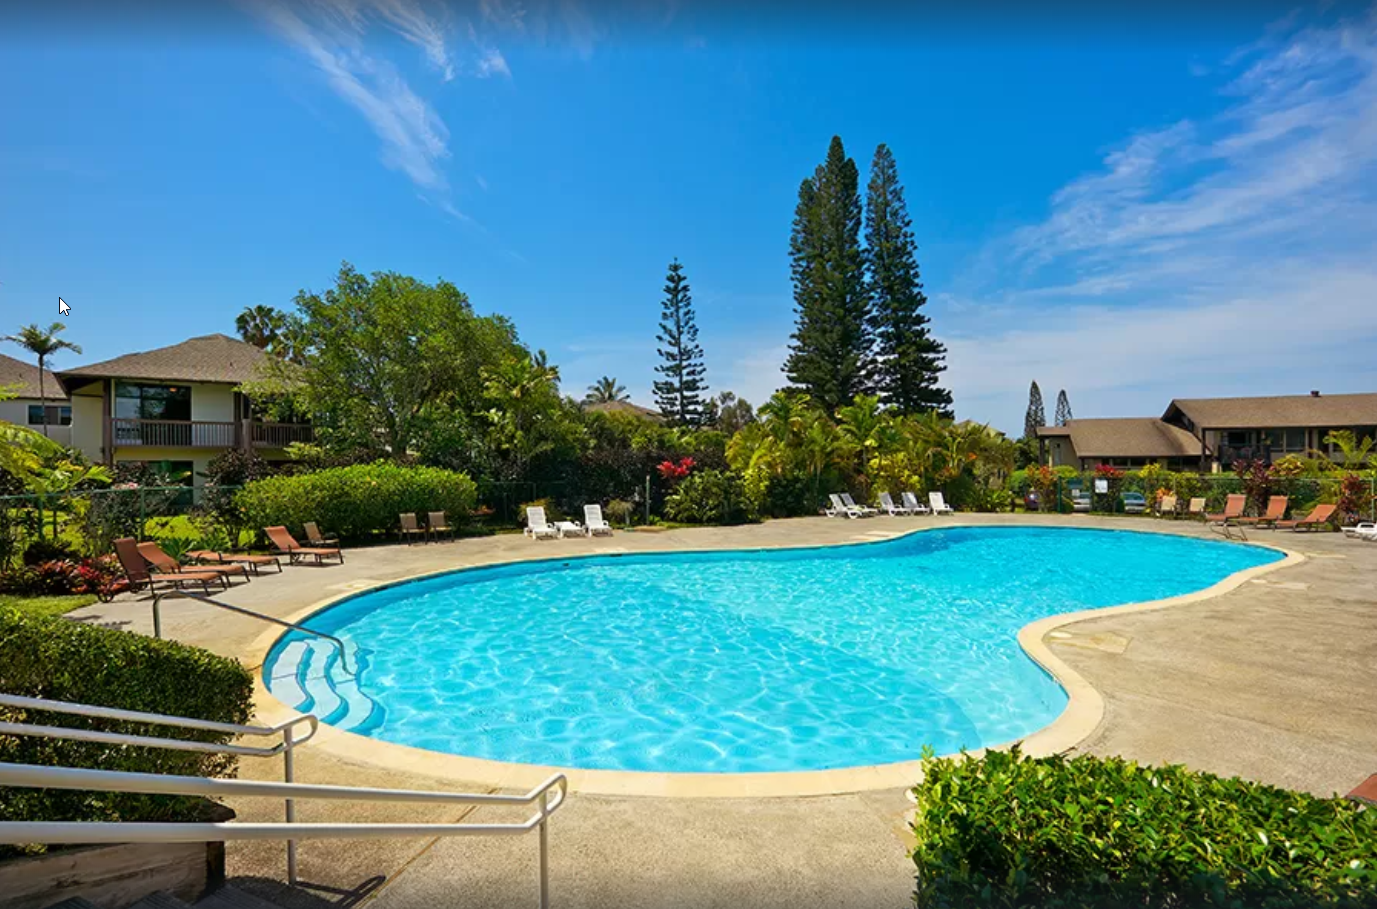 Largest condo pool in Princeville